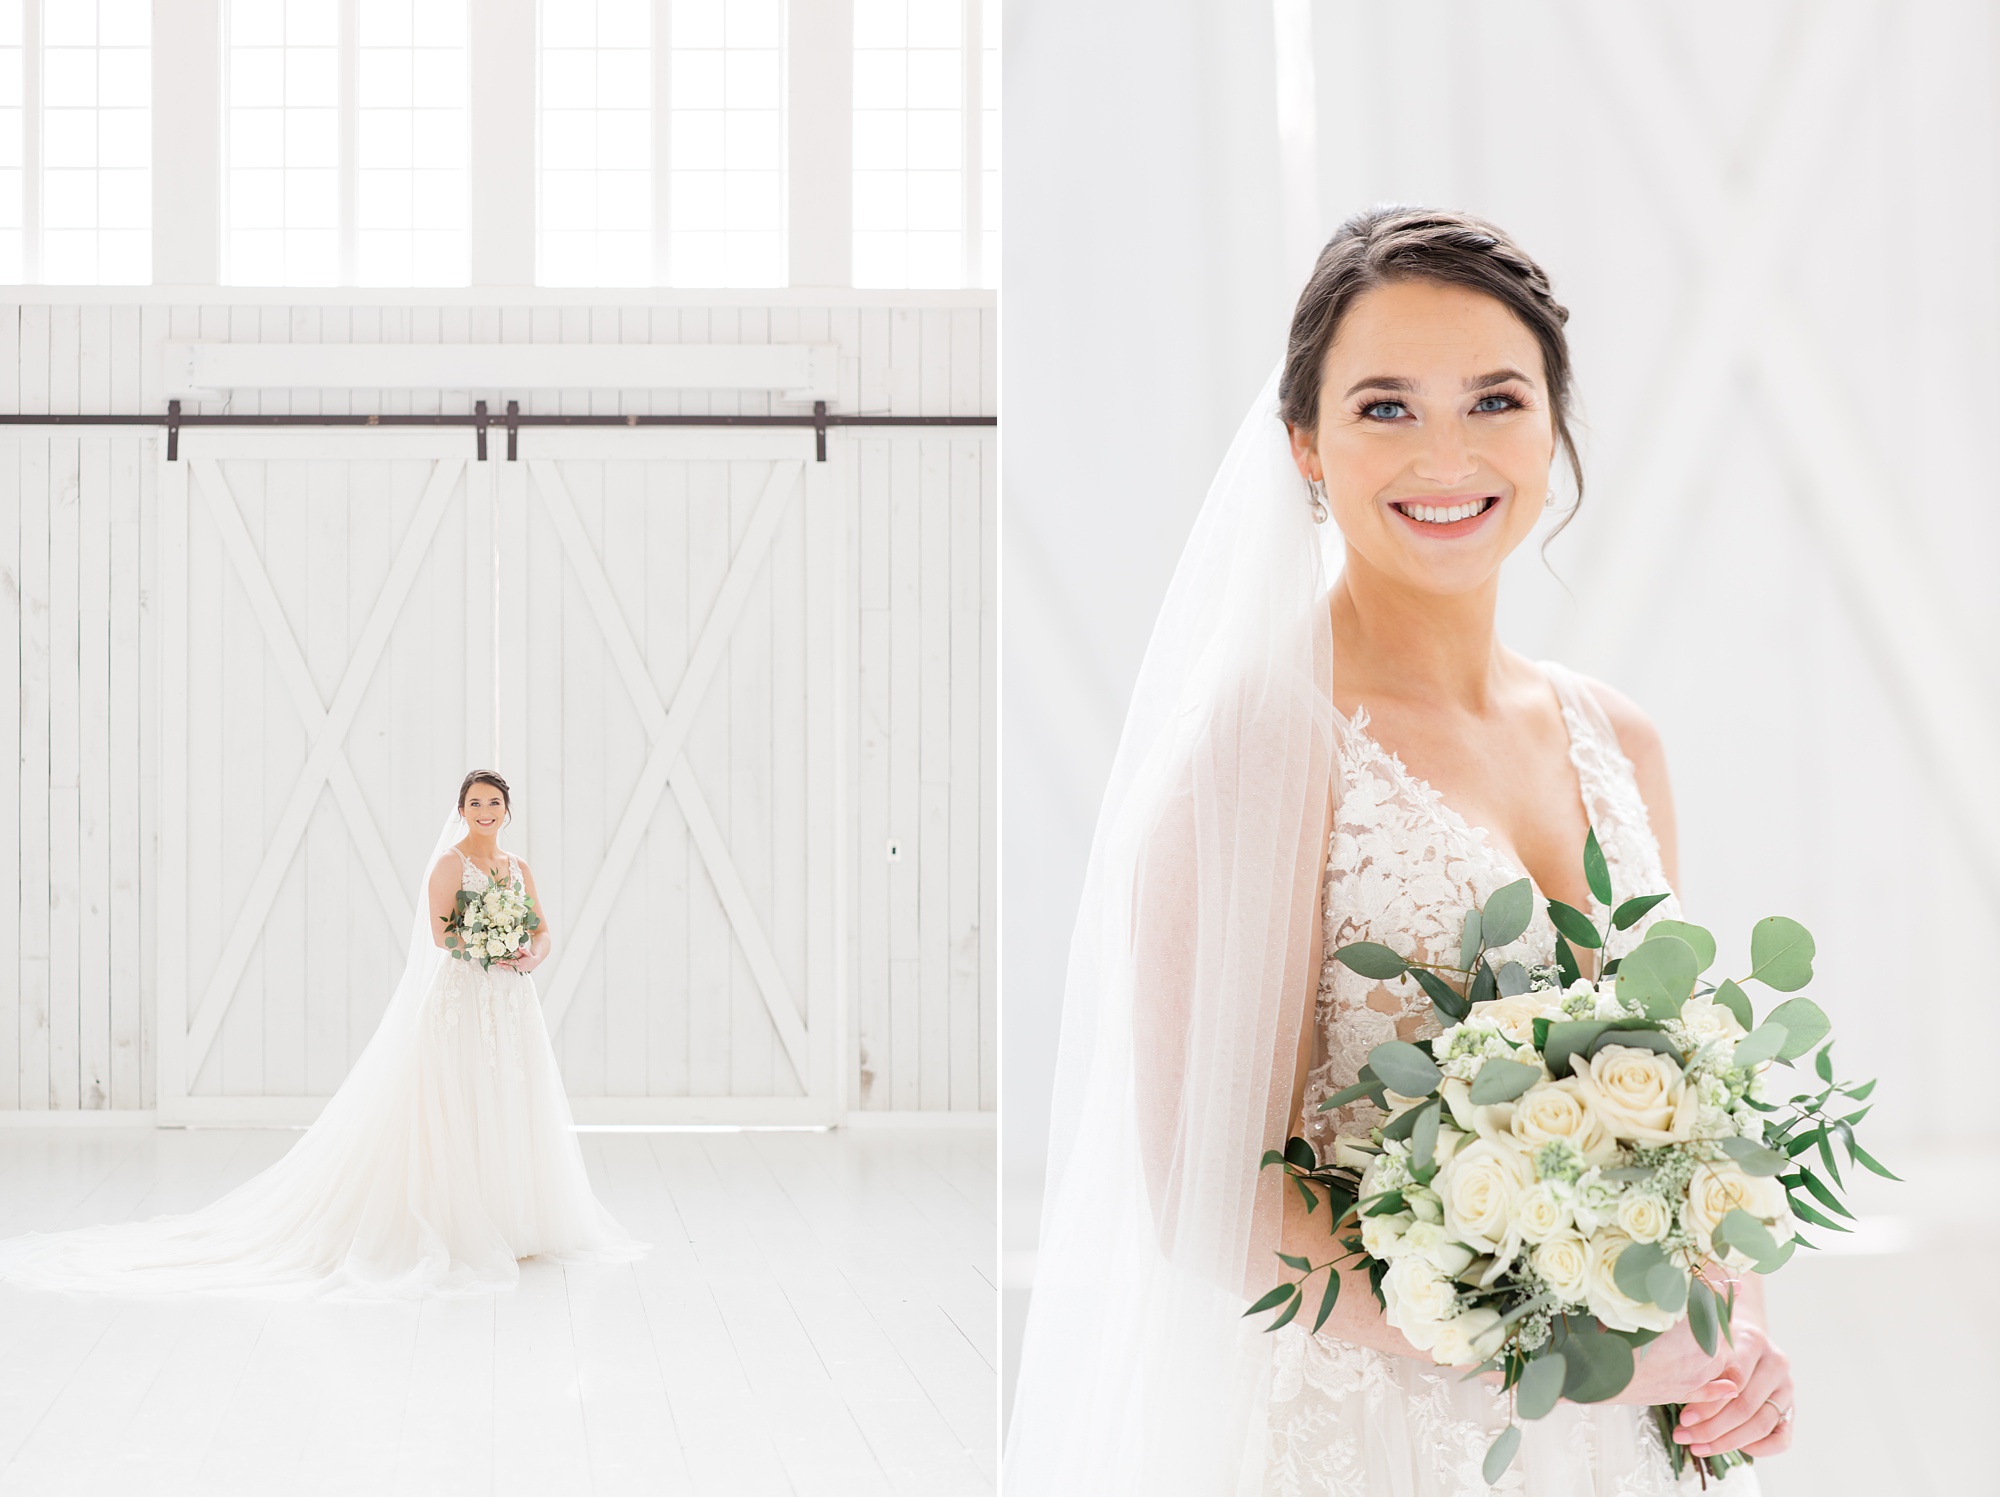 White Sparrow bridal portraits of bride with all-white bouquet